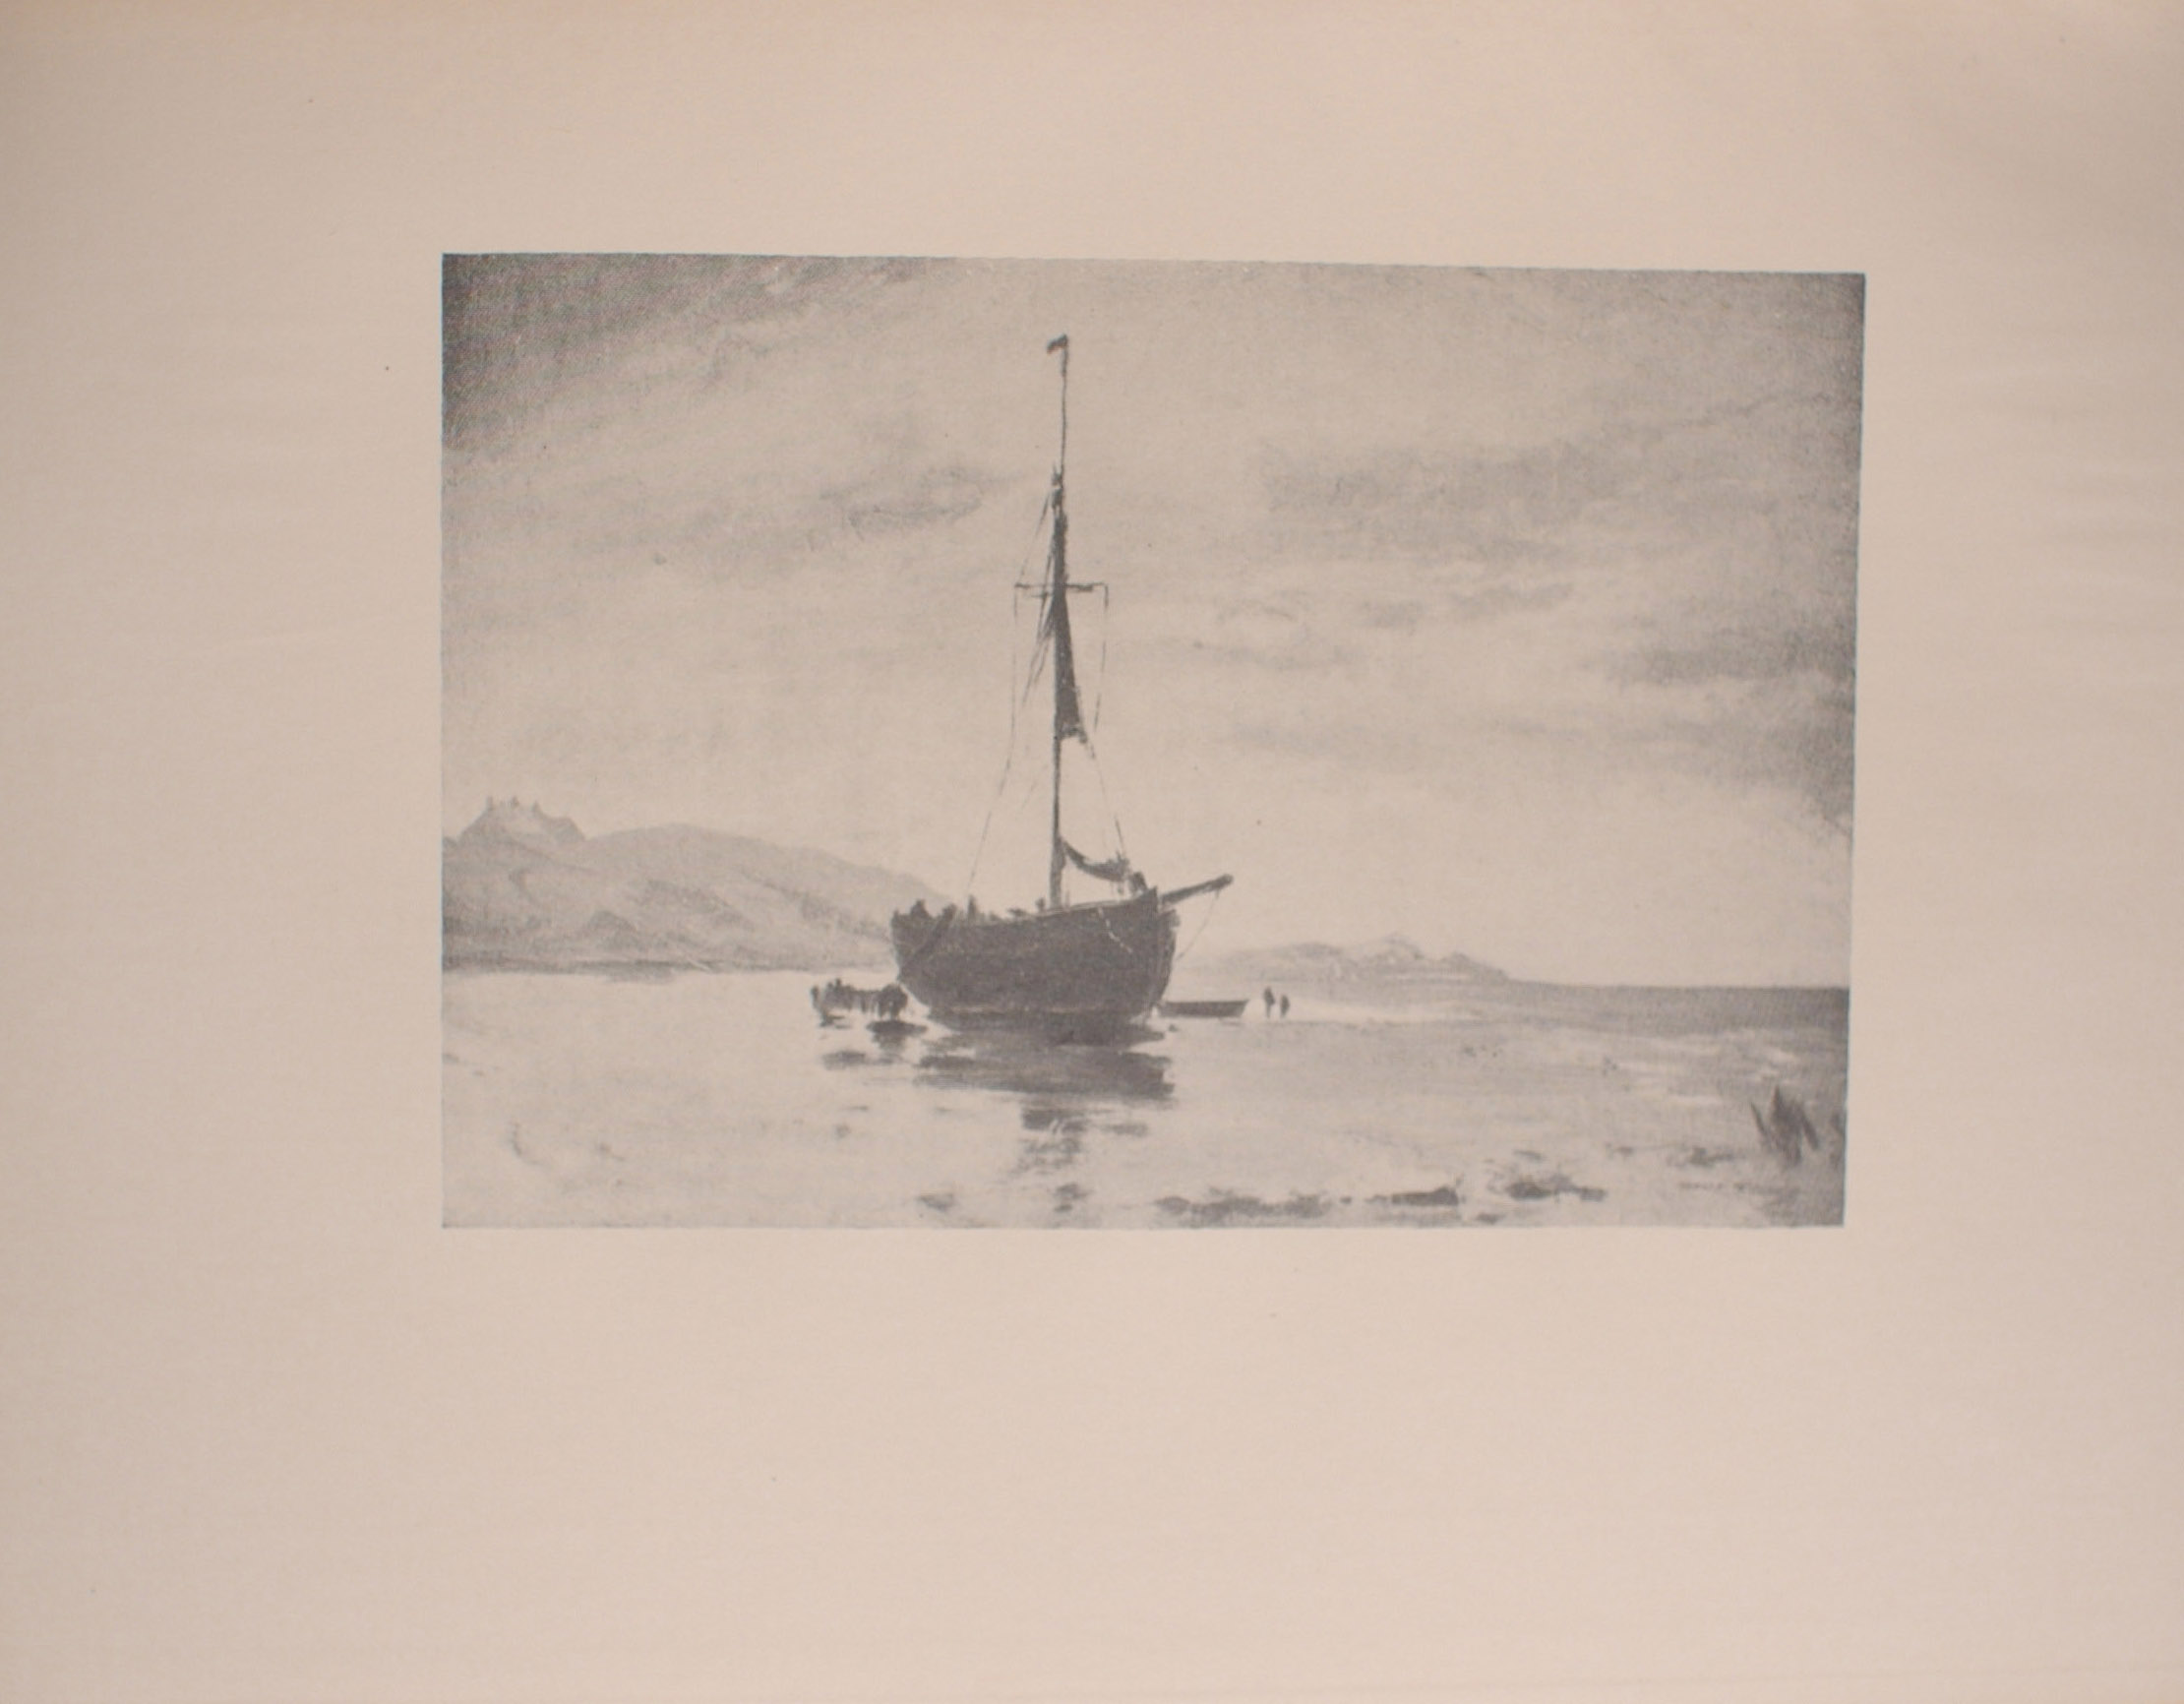 Image is of a boat with a sail floating near land on a calm reflective body of water In the background there are two distinct landmasses on either side of the boat The ship is shown in ¾ view with its bowsprit pointing right A flag is at the top of the middle pole The sky is cloudy The image is horizontally displayed